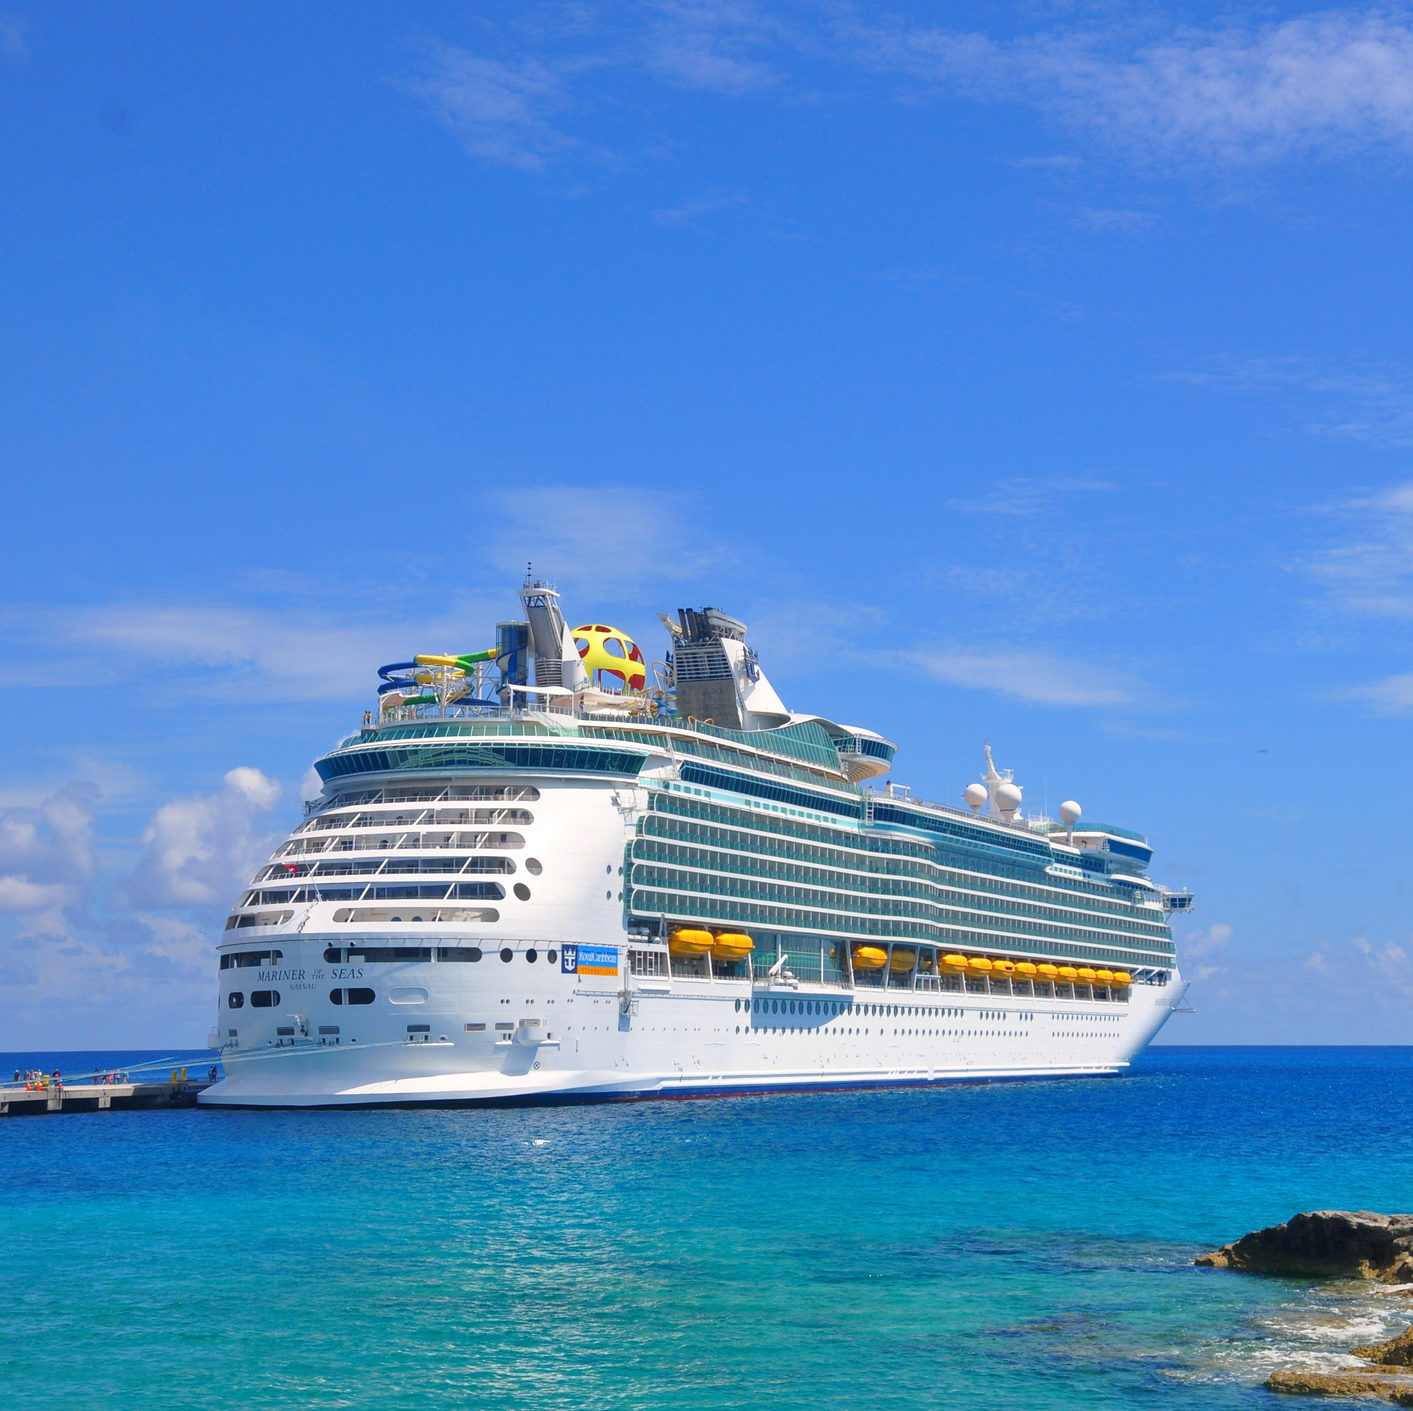 7night Royal Caribbean cruises from 308 + save 60 on 2nd guest